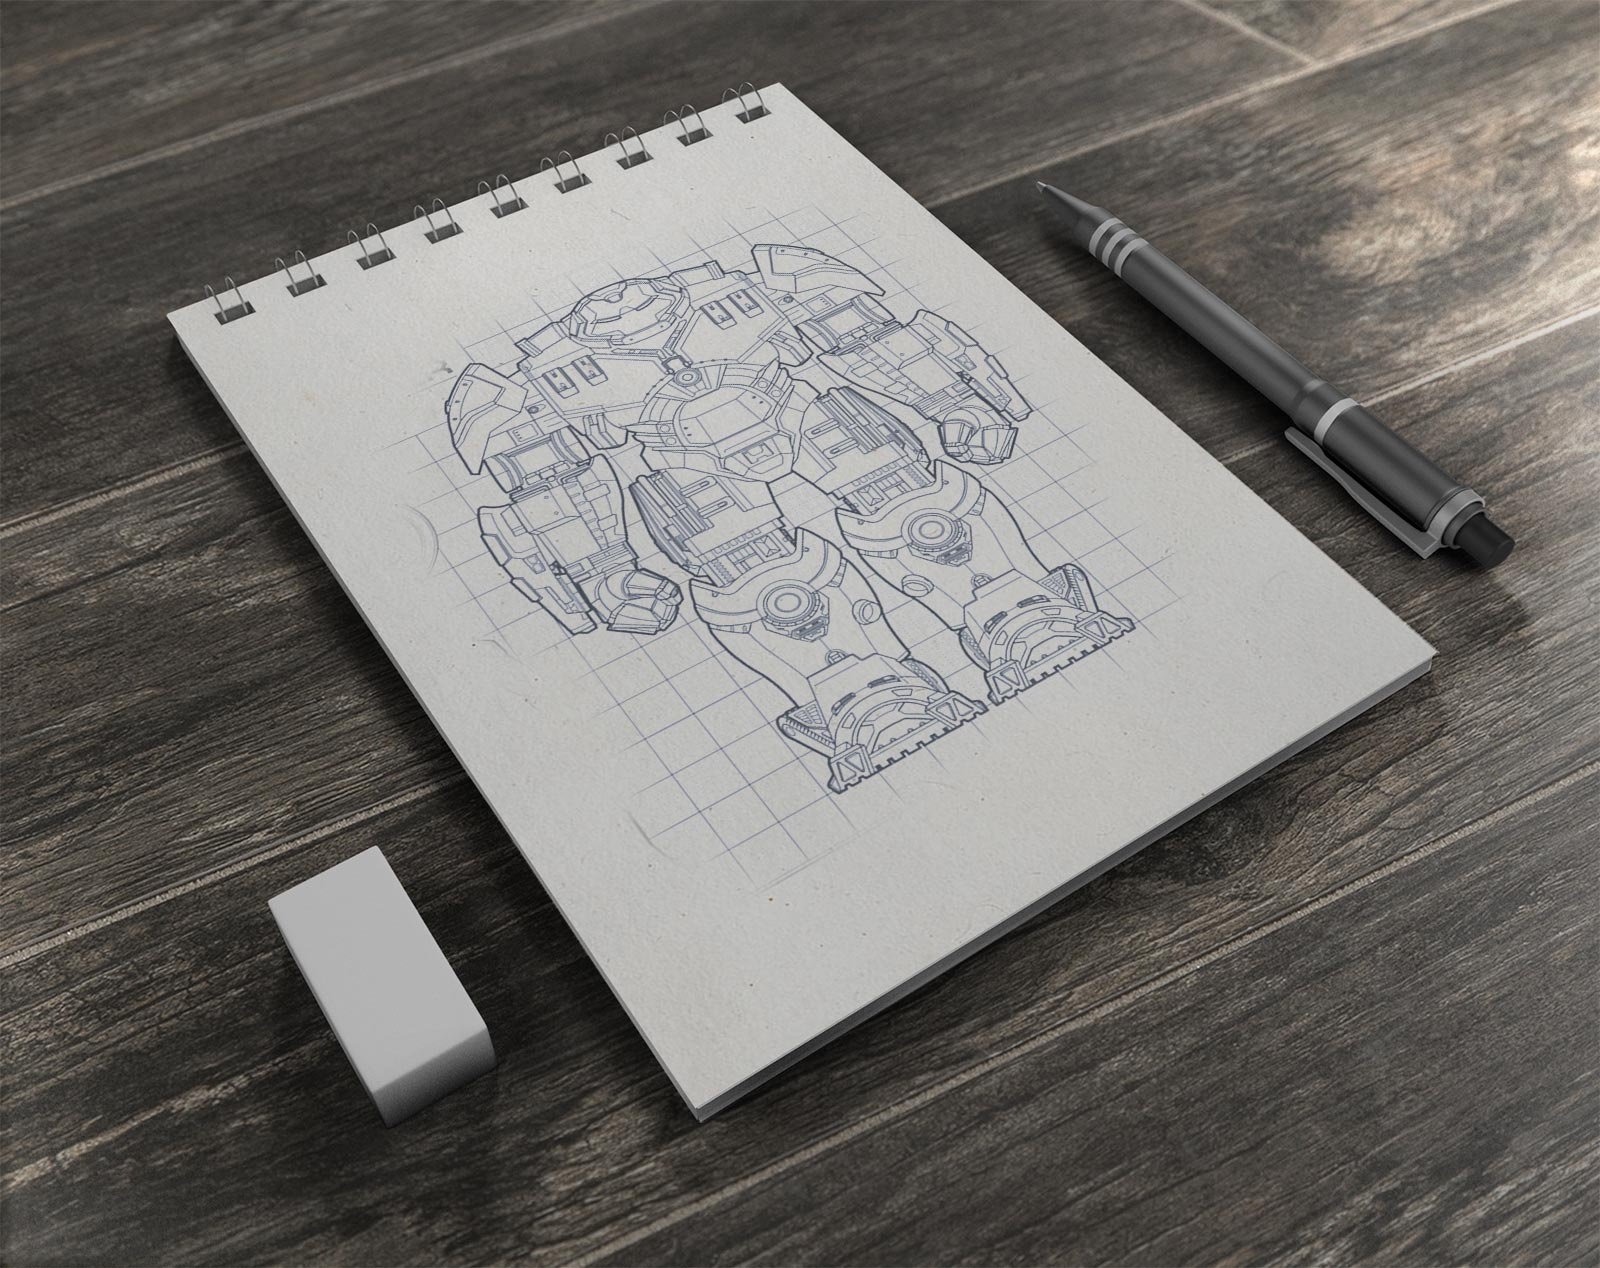 Best Sketch Drawing Online Free with Realistic